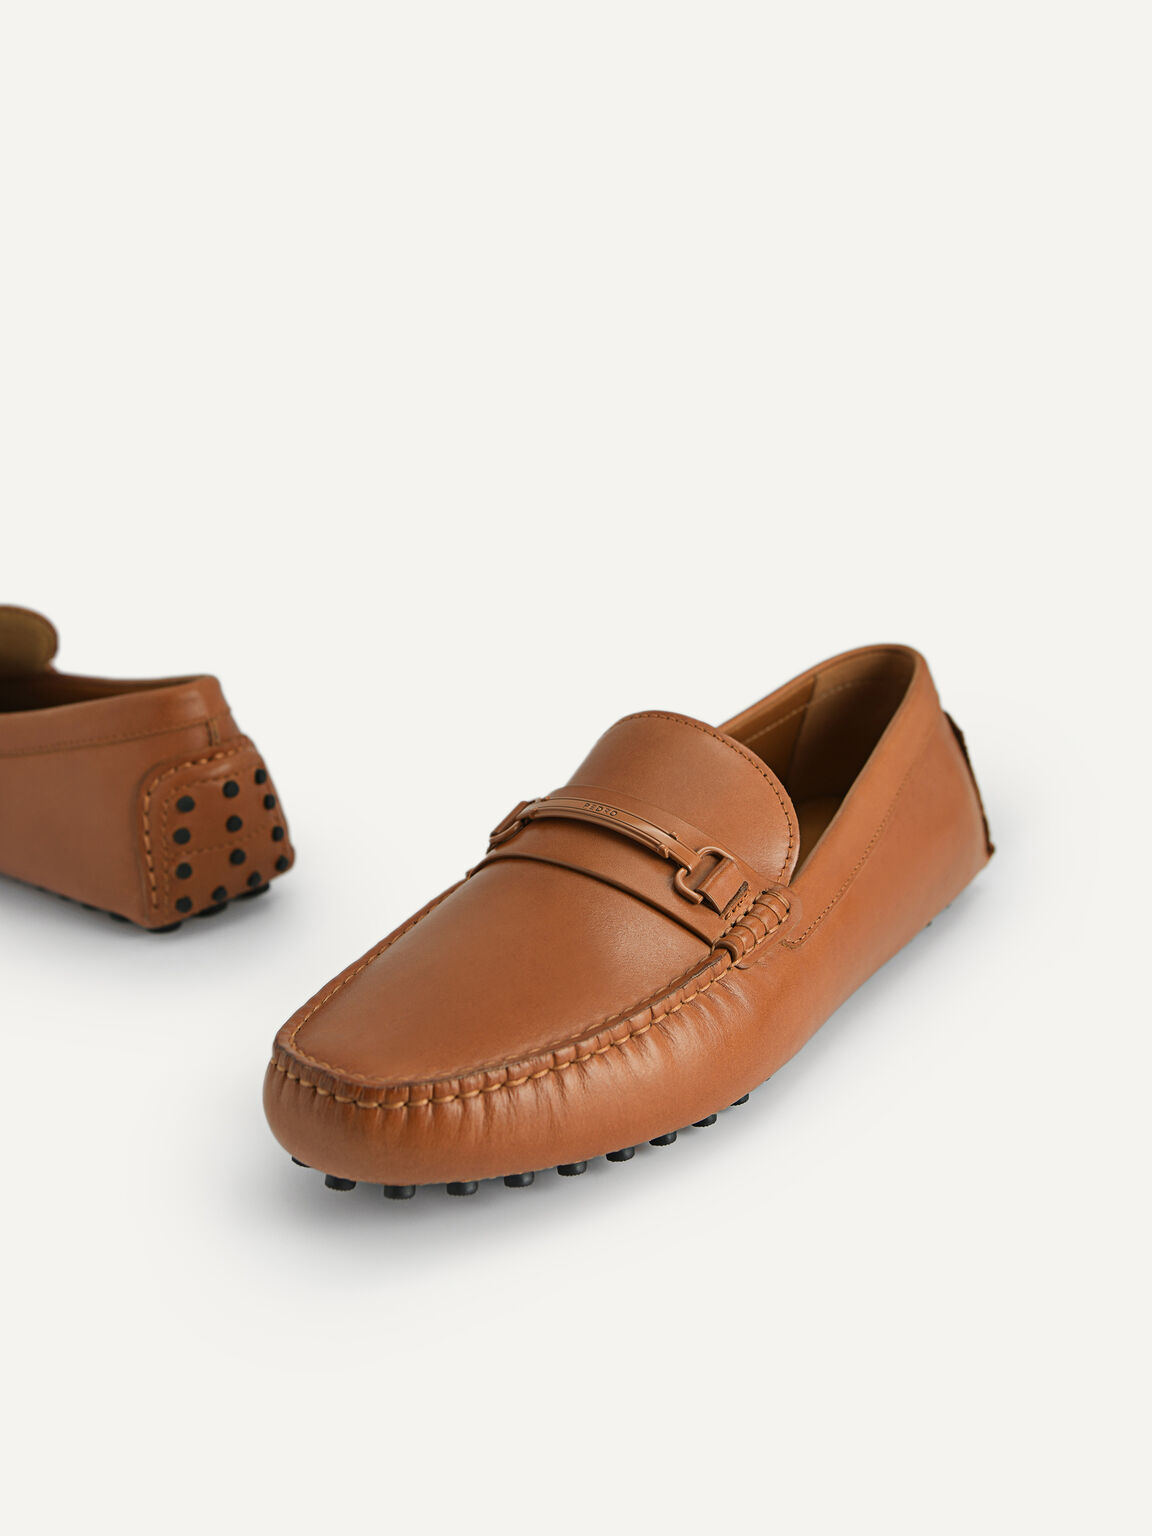 Leather Moccasins with Metal Bit, Camel